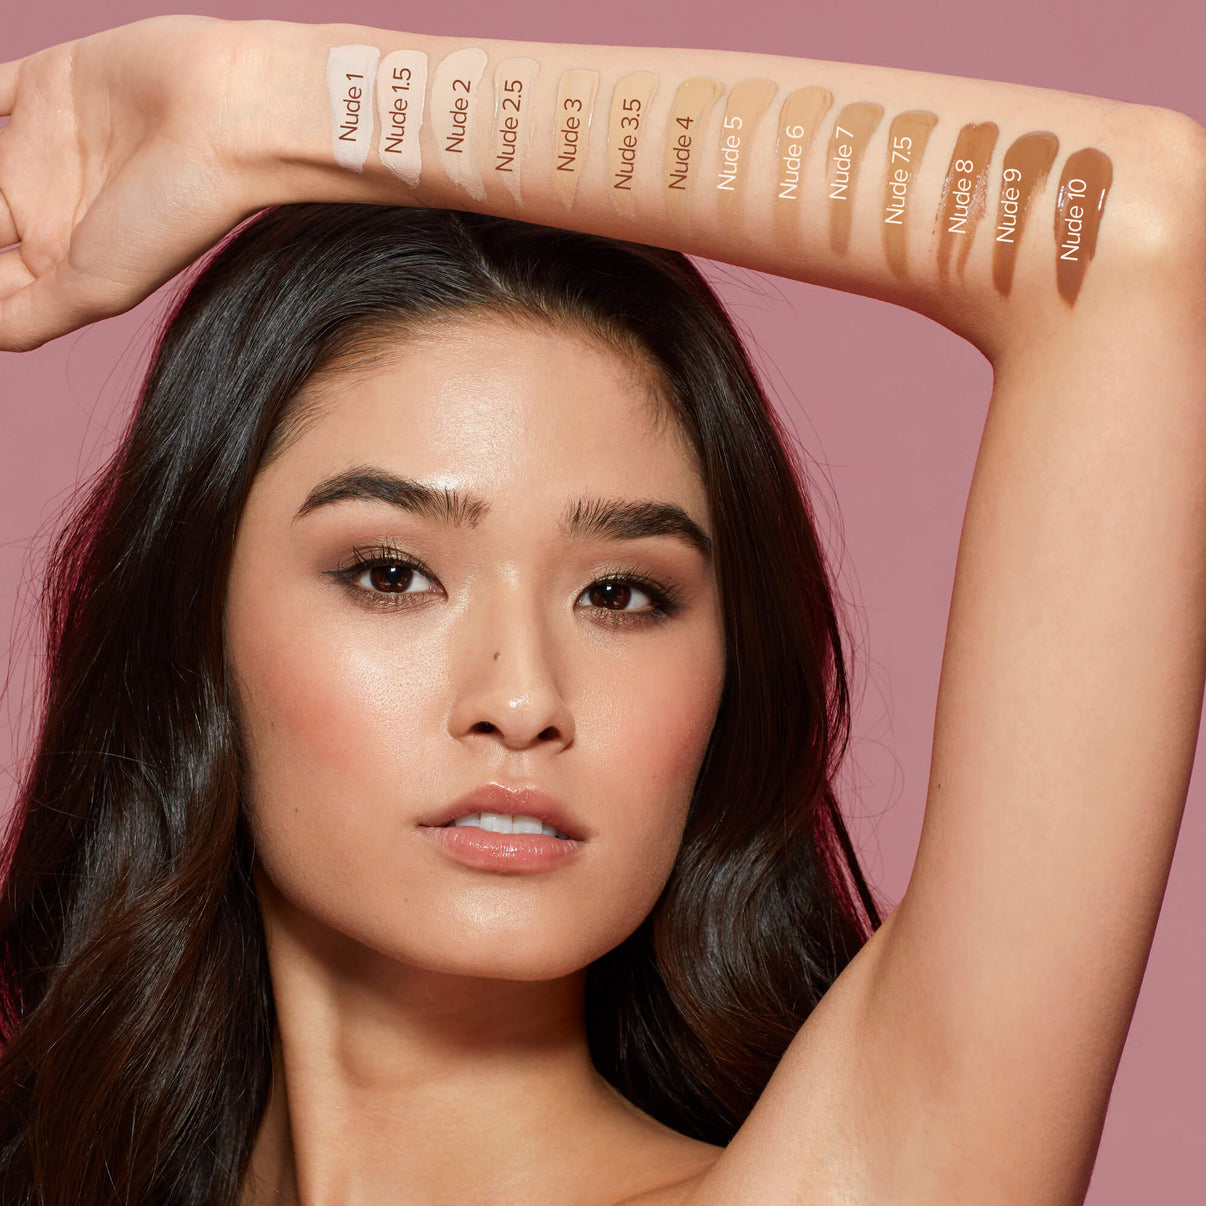 Young woman with swatches of Tinted Cover in shade nude 3.5 and other shades